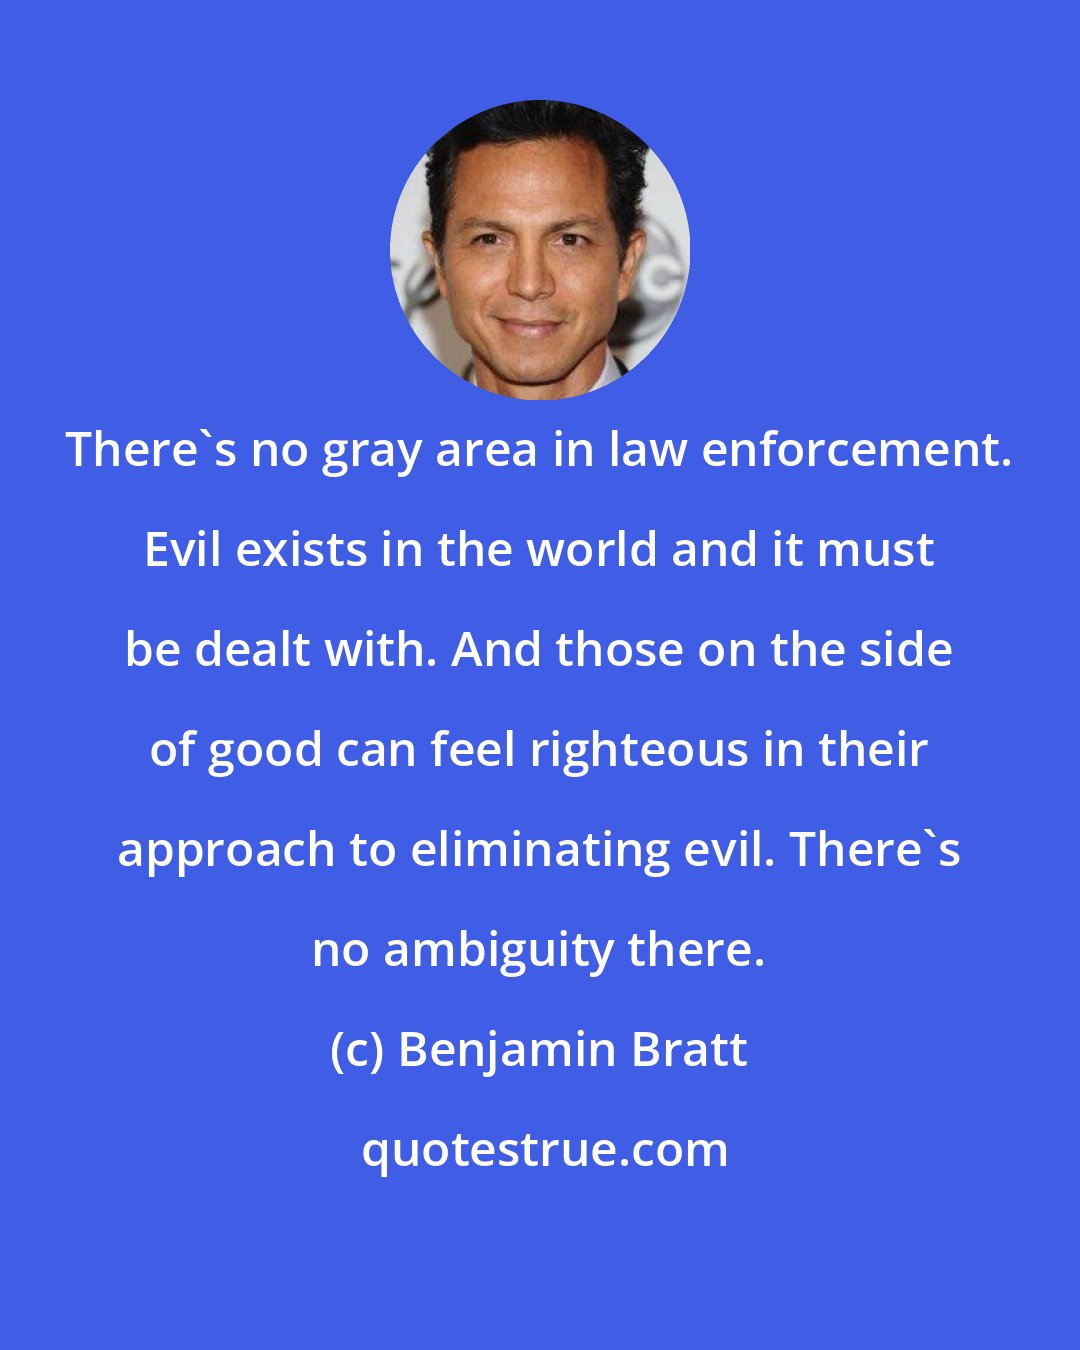 Benjamin Bratt: There's no gray area in law enforcement. Evil exists in the world and it must be dealt with. And those on the side of good can feel righteous in their approach to eliminating evil. There's no ambiguity there.